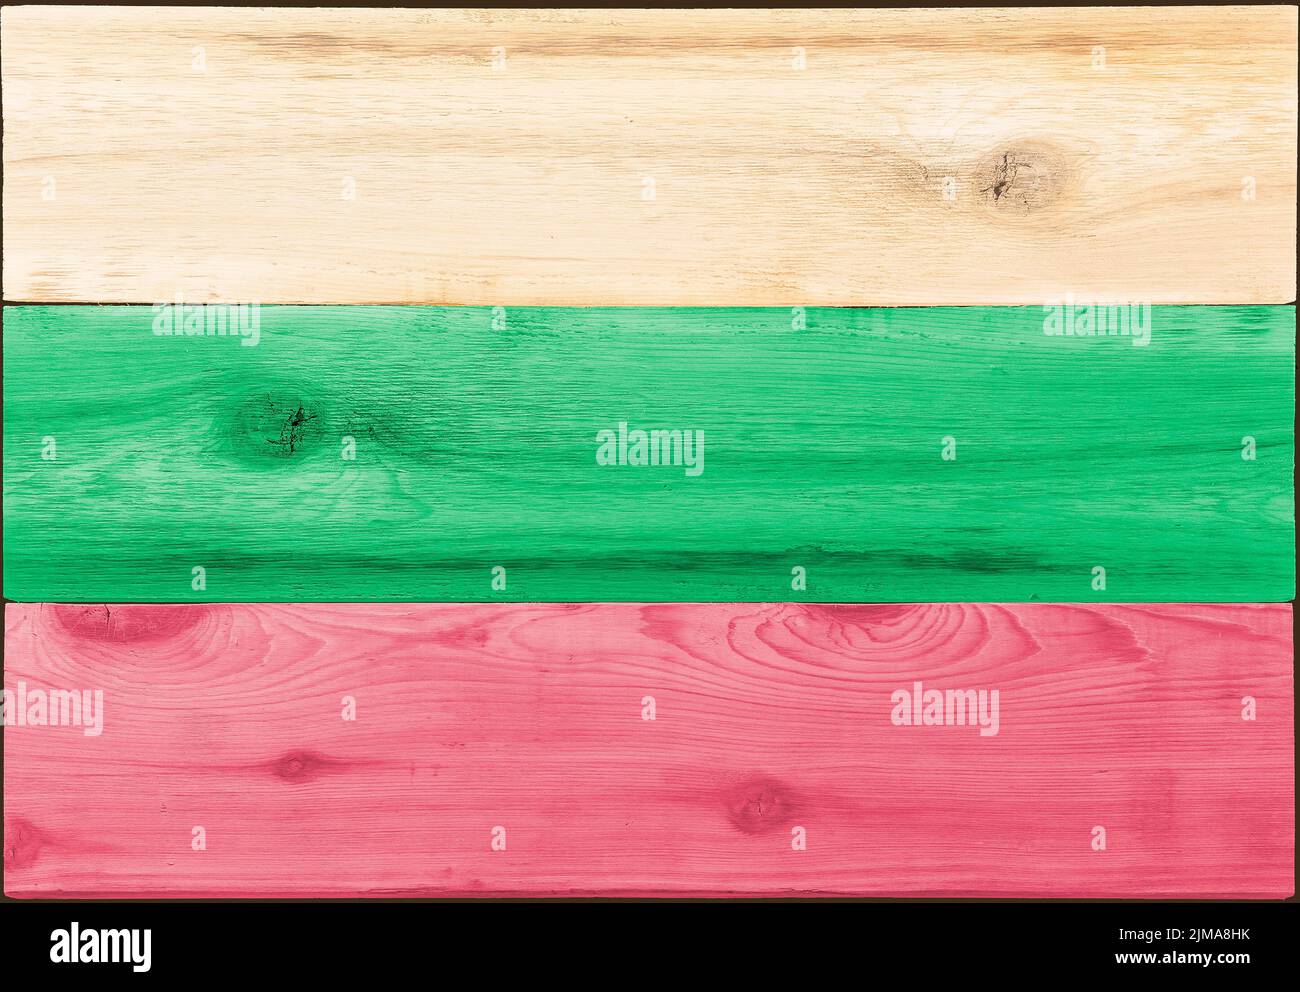 Timber planks in the shape of a Bulgaria flag Stock Photo